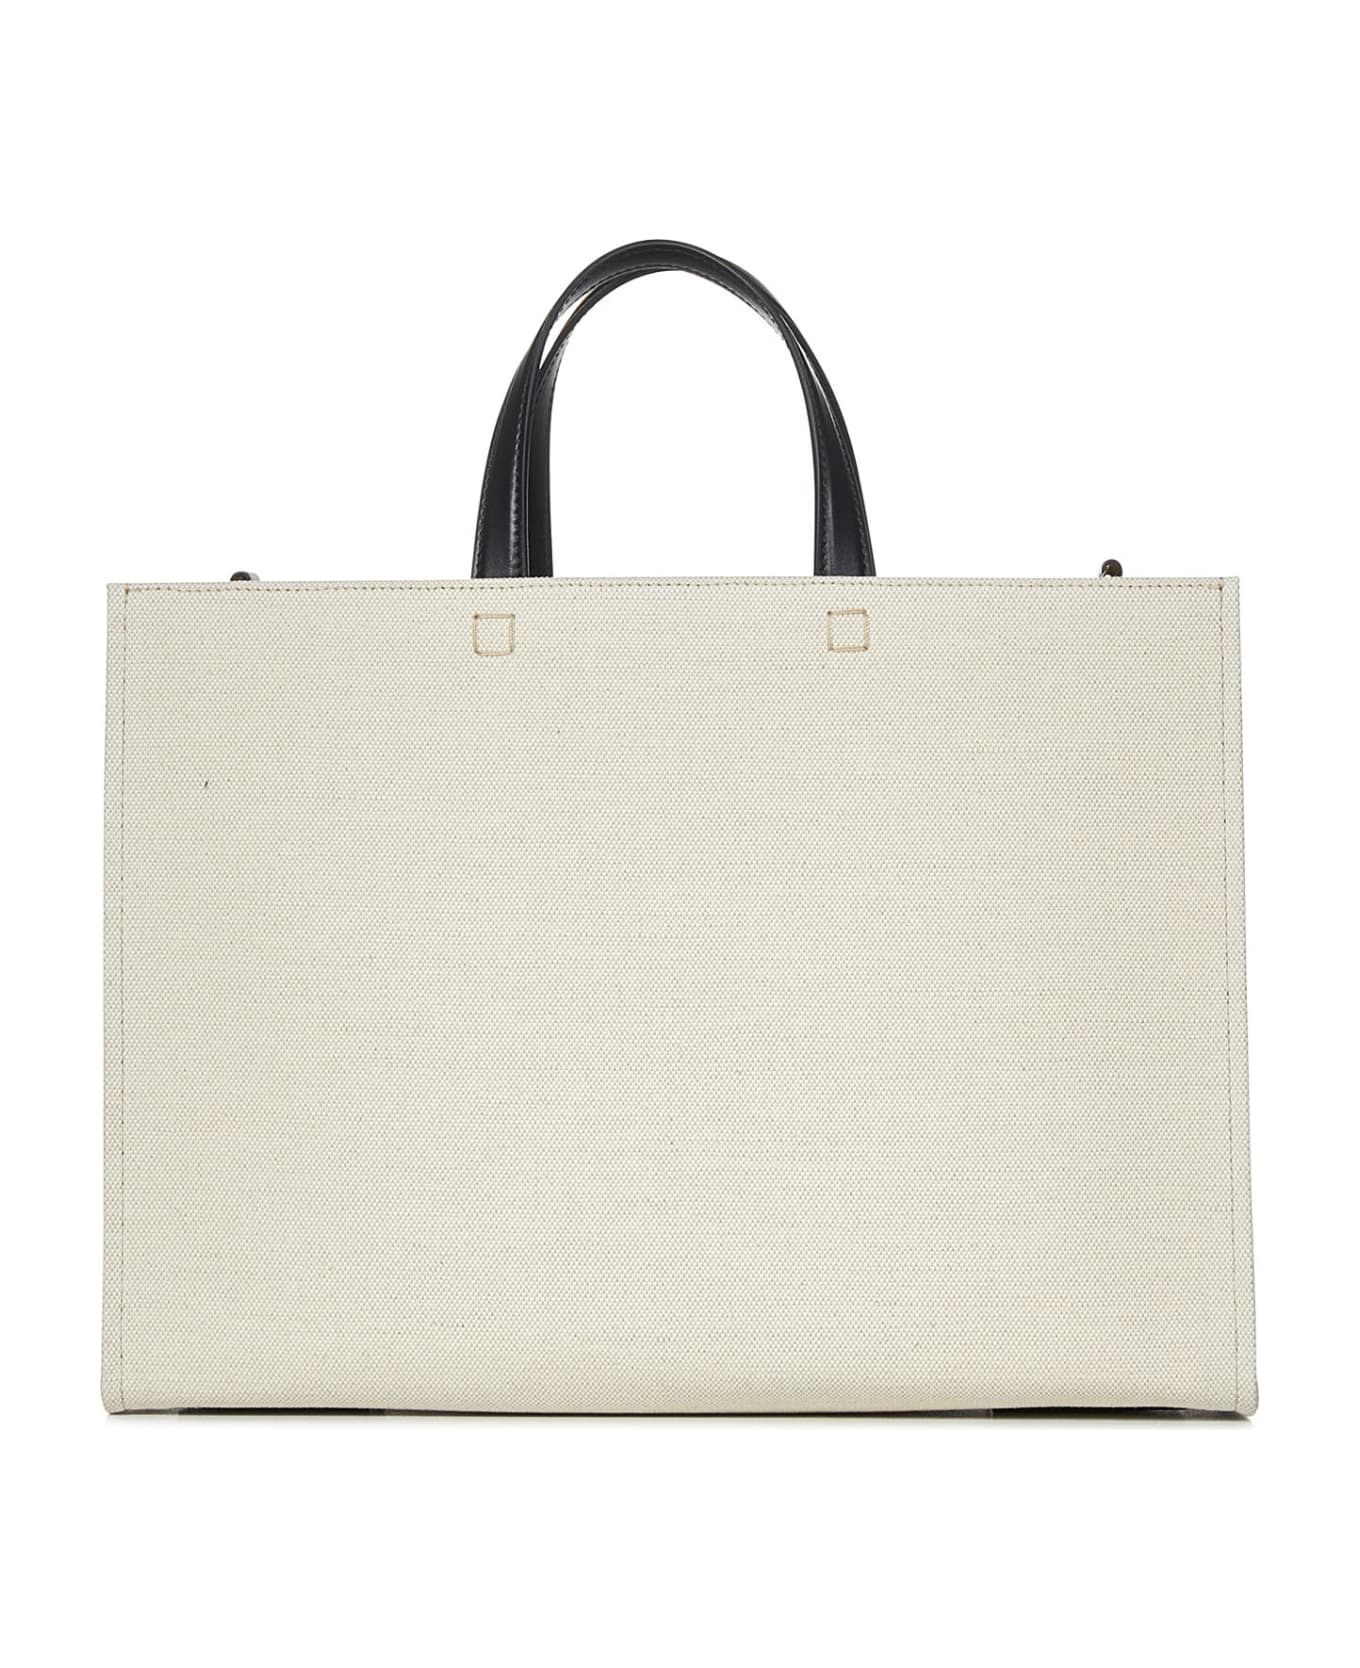 Givenchy G Medium Tote - Beige